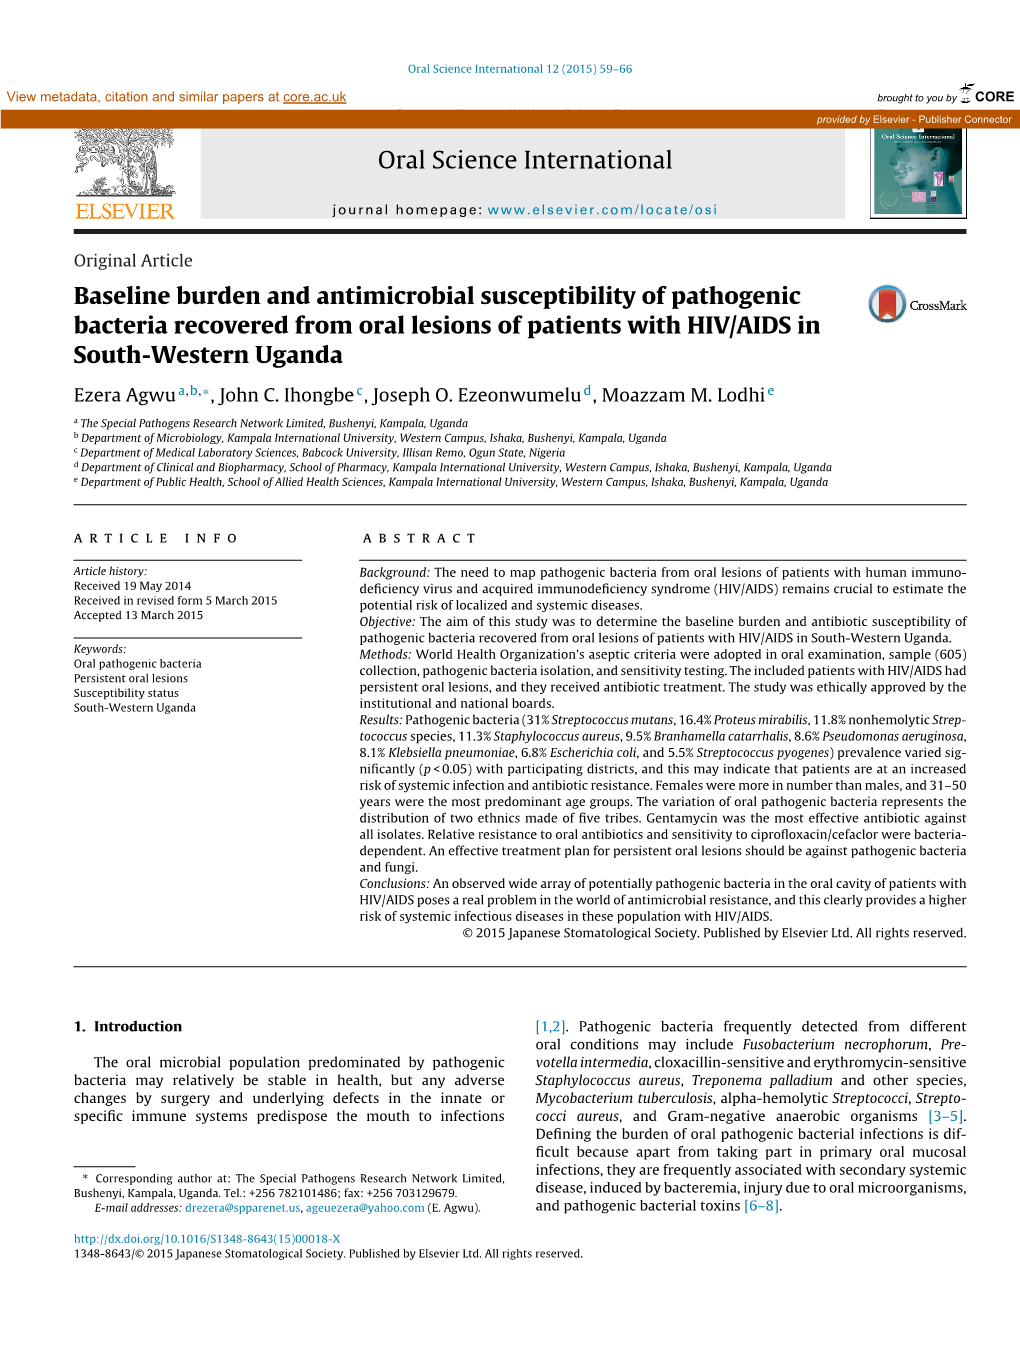 Baseline Burden and Antimicrobial Susceptibility of Pathogenic Bacteria